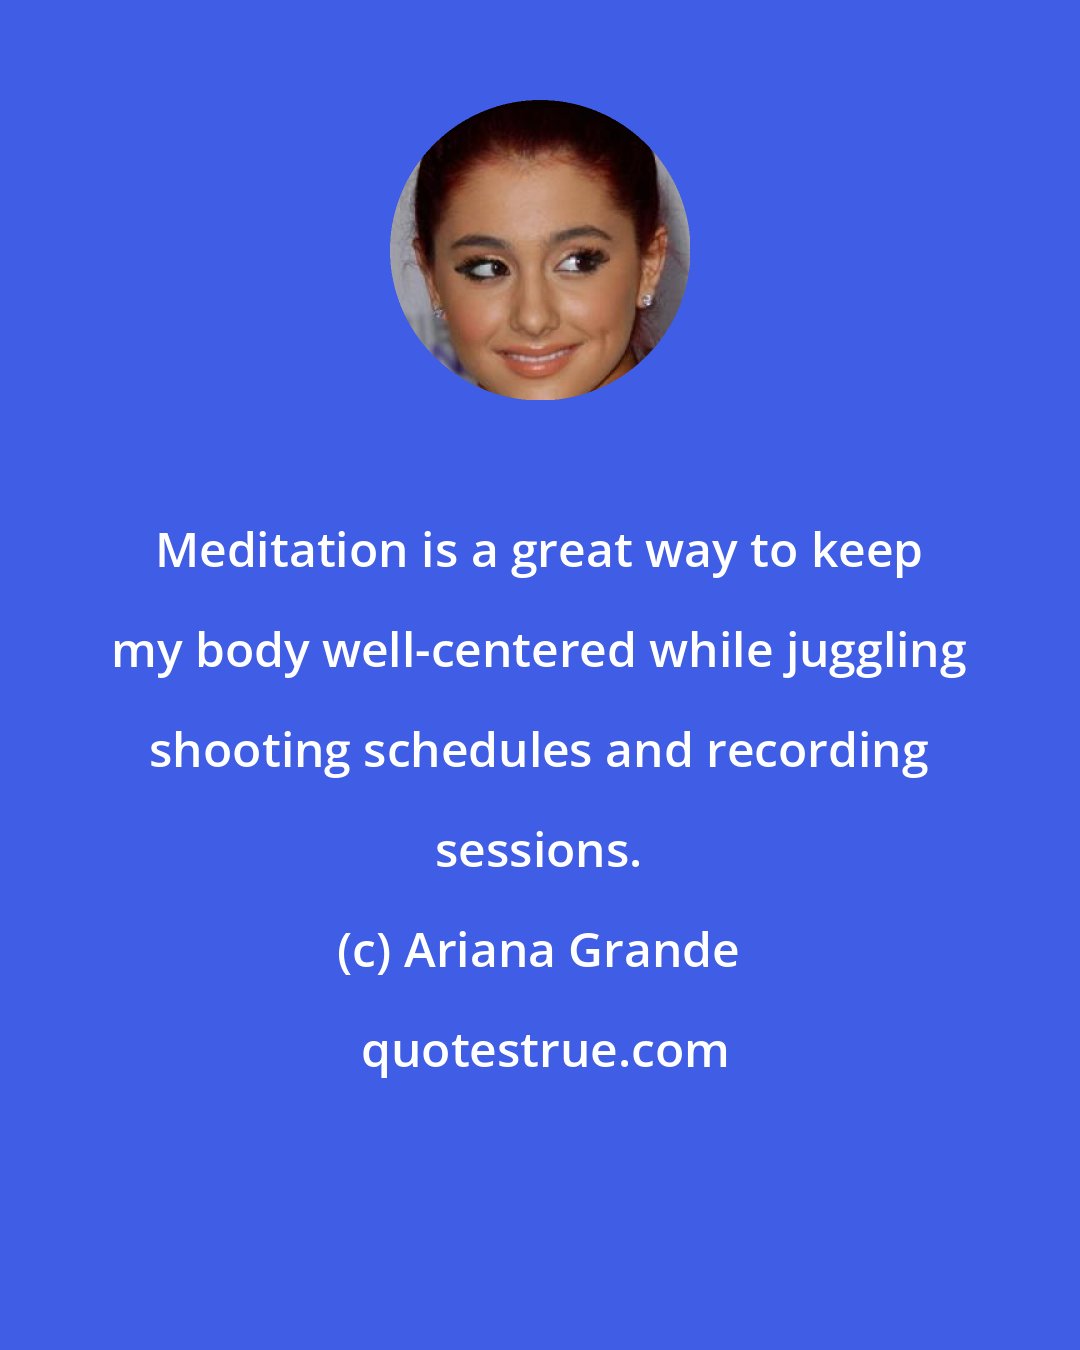 Ariana Grande: Meditation is a great way to keep my body well-centered while juggling shooting schedules and recording sessions.